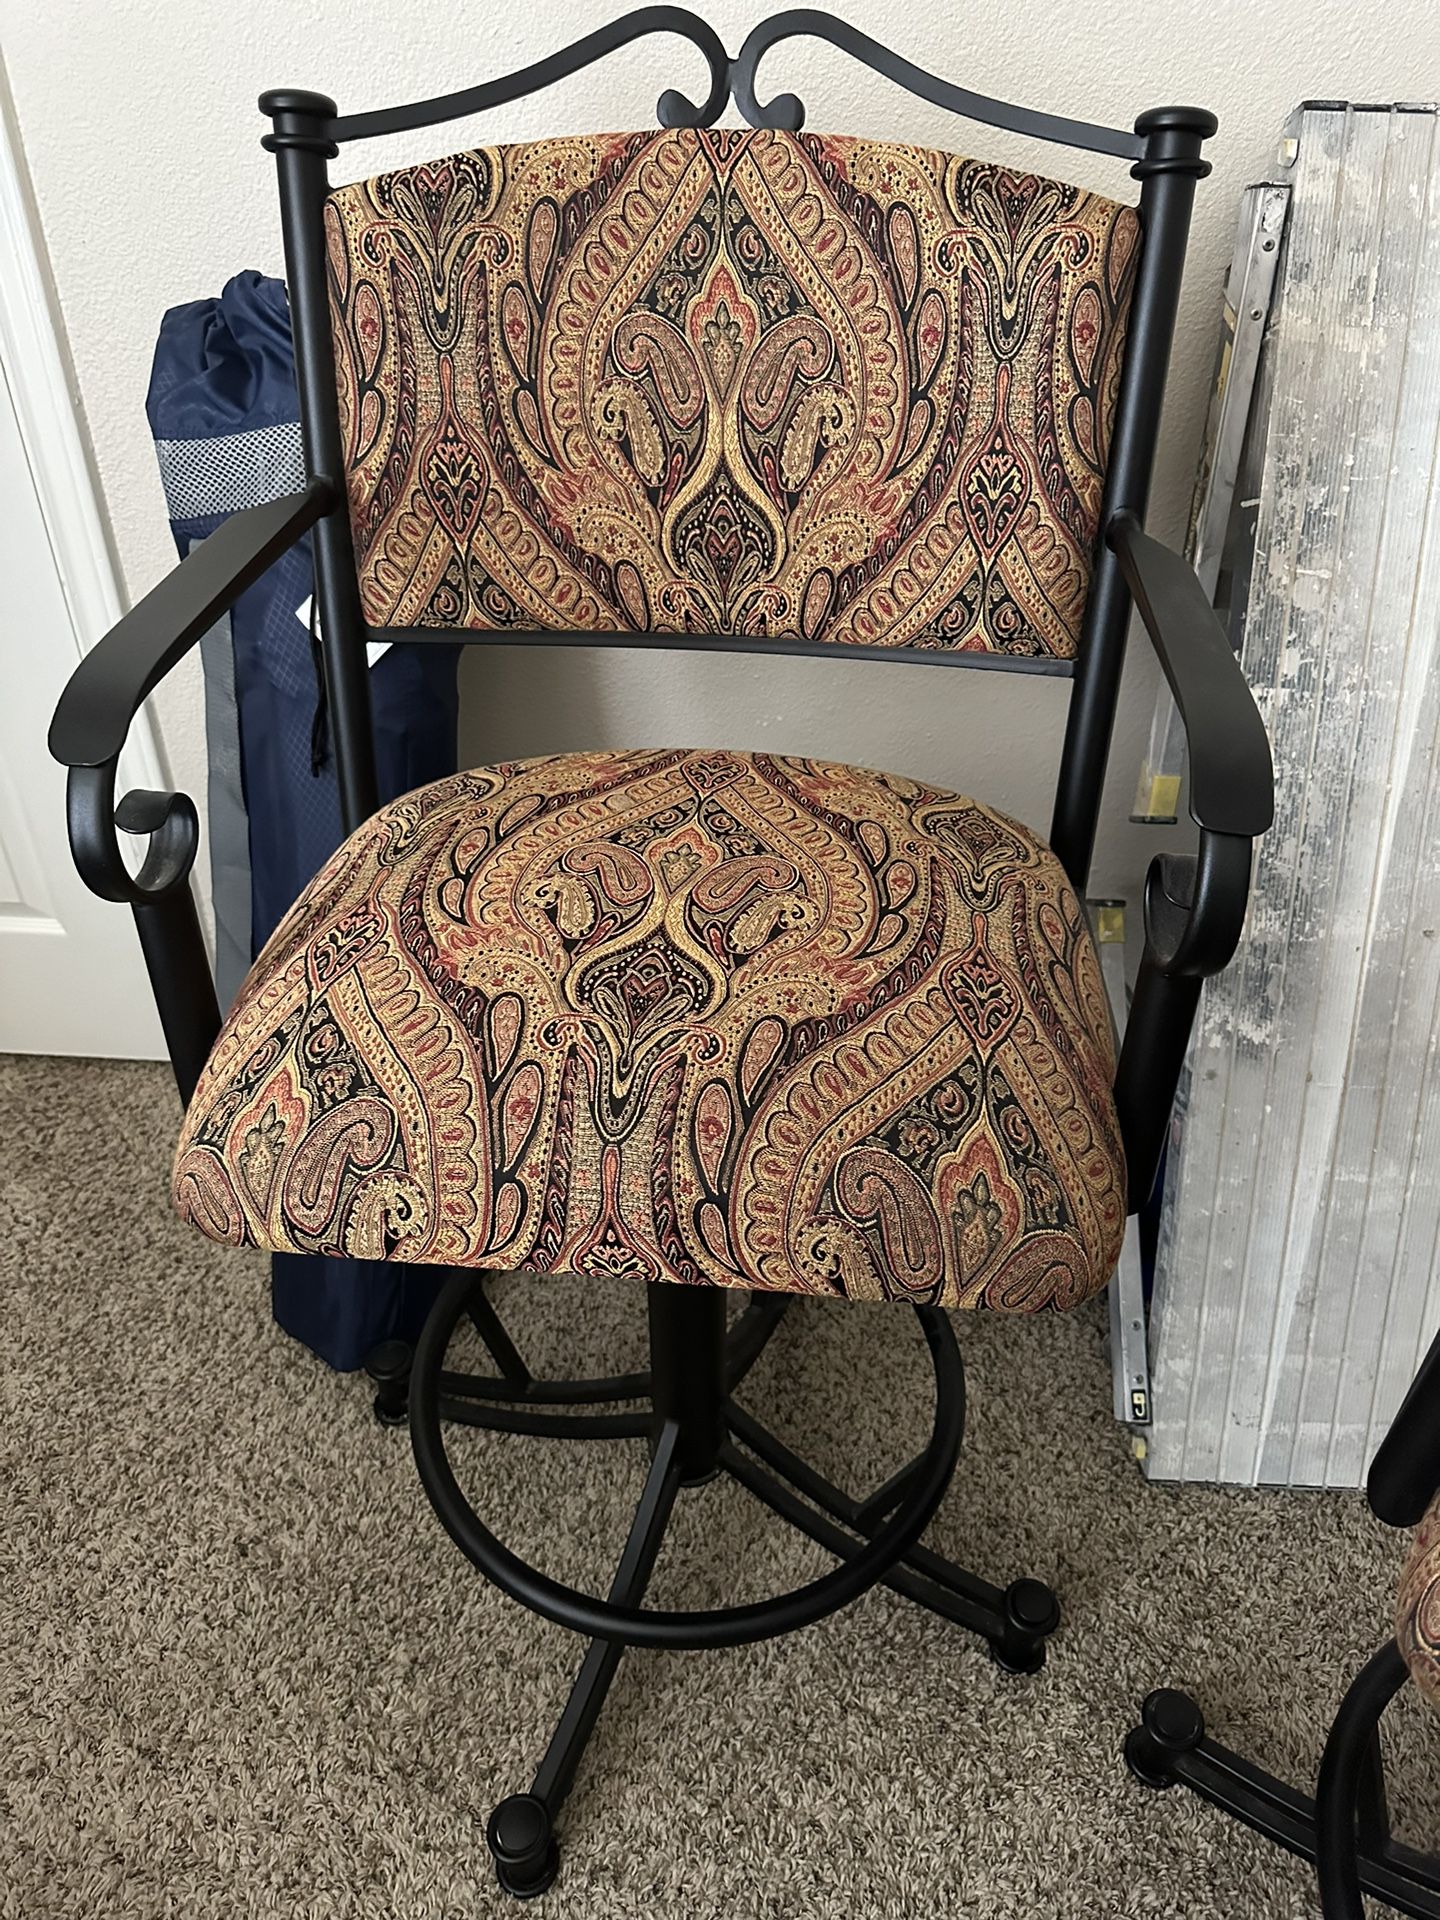 Chairs (set of 2)